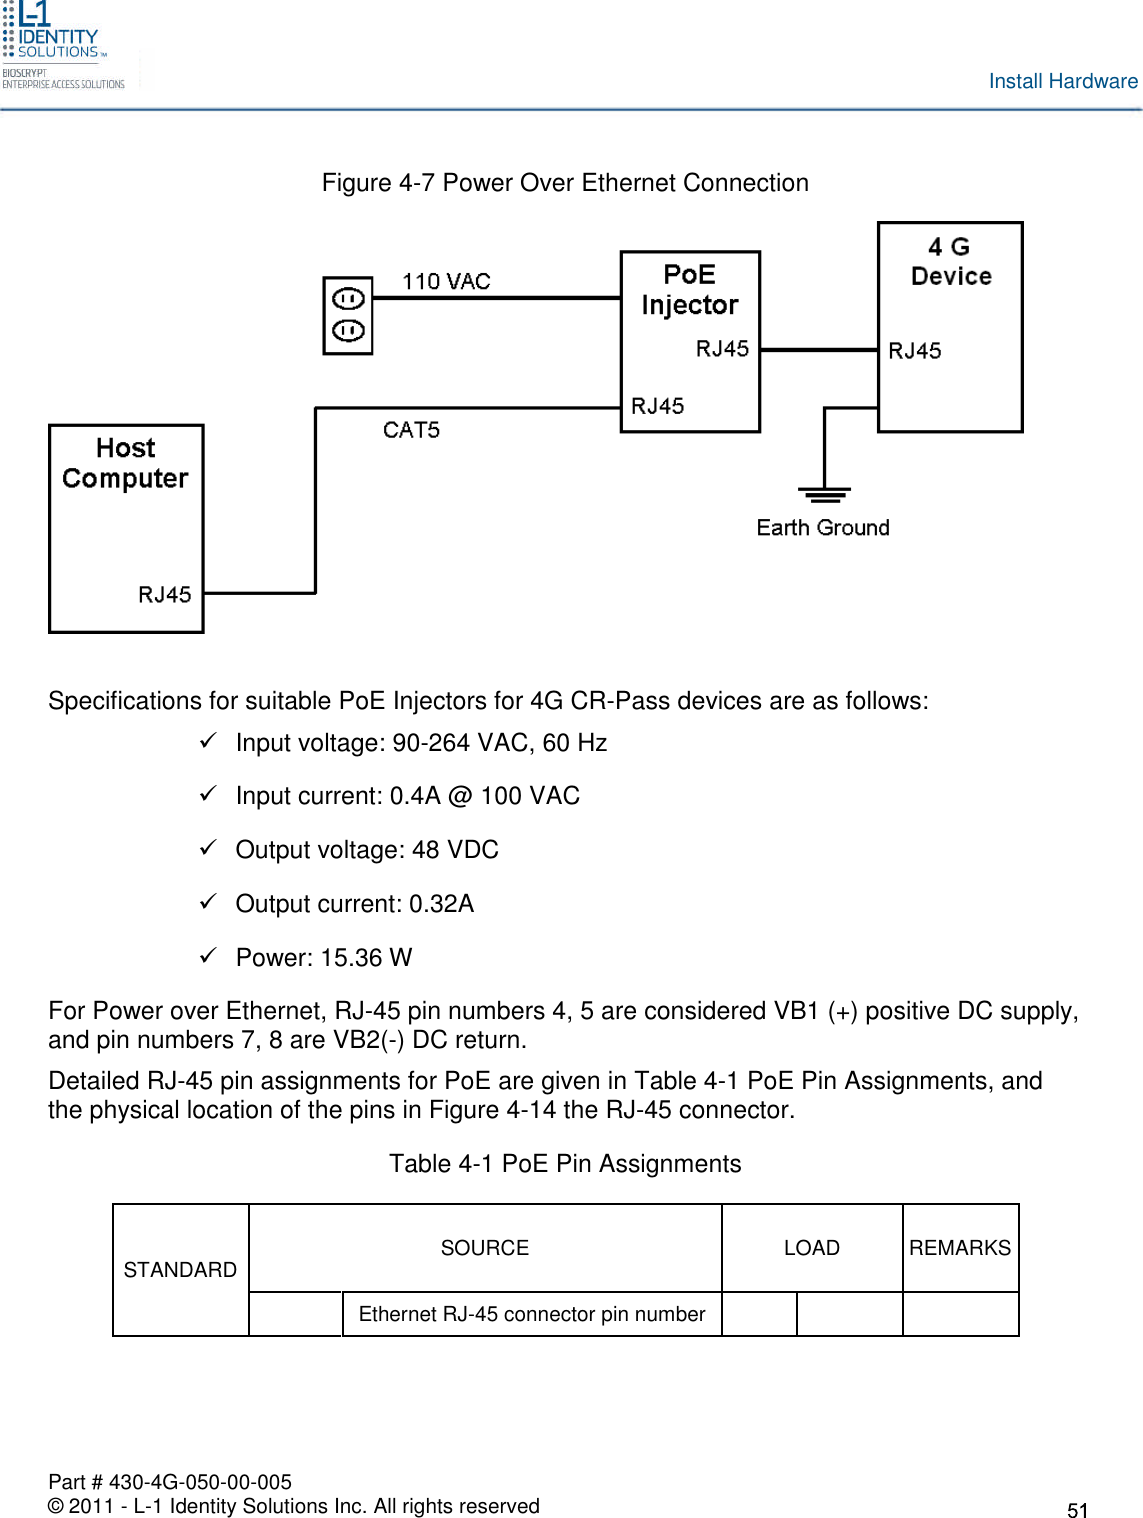 Part # 430-4G-050-00-005© 2011 - L-1 Identity Solutions Inc. All rights reservedInstall HardwareFigure 4-7 Power Over Ethernet ConnectionSpecifications for suitable PoE Injectors for 4G CR-Pass devices are as follows:Input voltage: 90-264 VAC, 60 HzInput current: 0.4A @ 100 VACOutput voltage: 48 VDCOutput current: 0.32APower: 15.36 WFor Power over Ethernet, RJ-45 pin numbers 4, 5 are considered VB1 (+) positive DC supply,and pin numbers 7, 8 are VB2(-) DC return.Detailed RJ-45 pin assignments for PoE are given in Table 4-1 PoE Pin Assignments, andthe physical location of the pins in Figure 4-14 the RJ-45 connector.Table 4-1 PoE Pin AssignmentsSTANDARD SOURCE LOAD REMARKSEthernet RJ-45 connector pin number